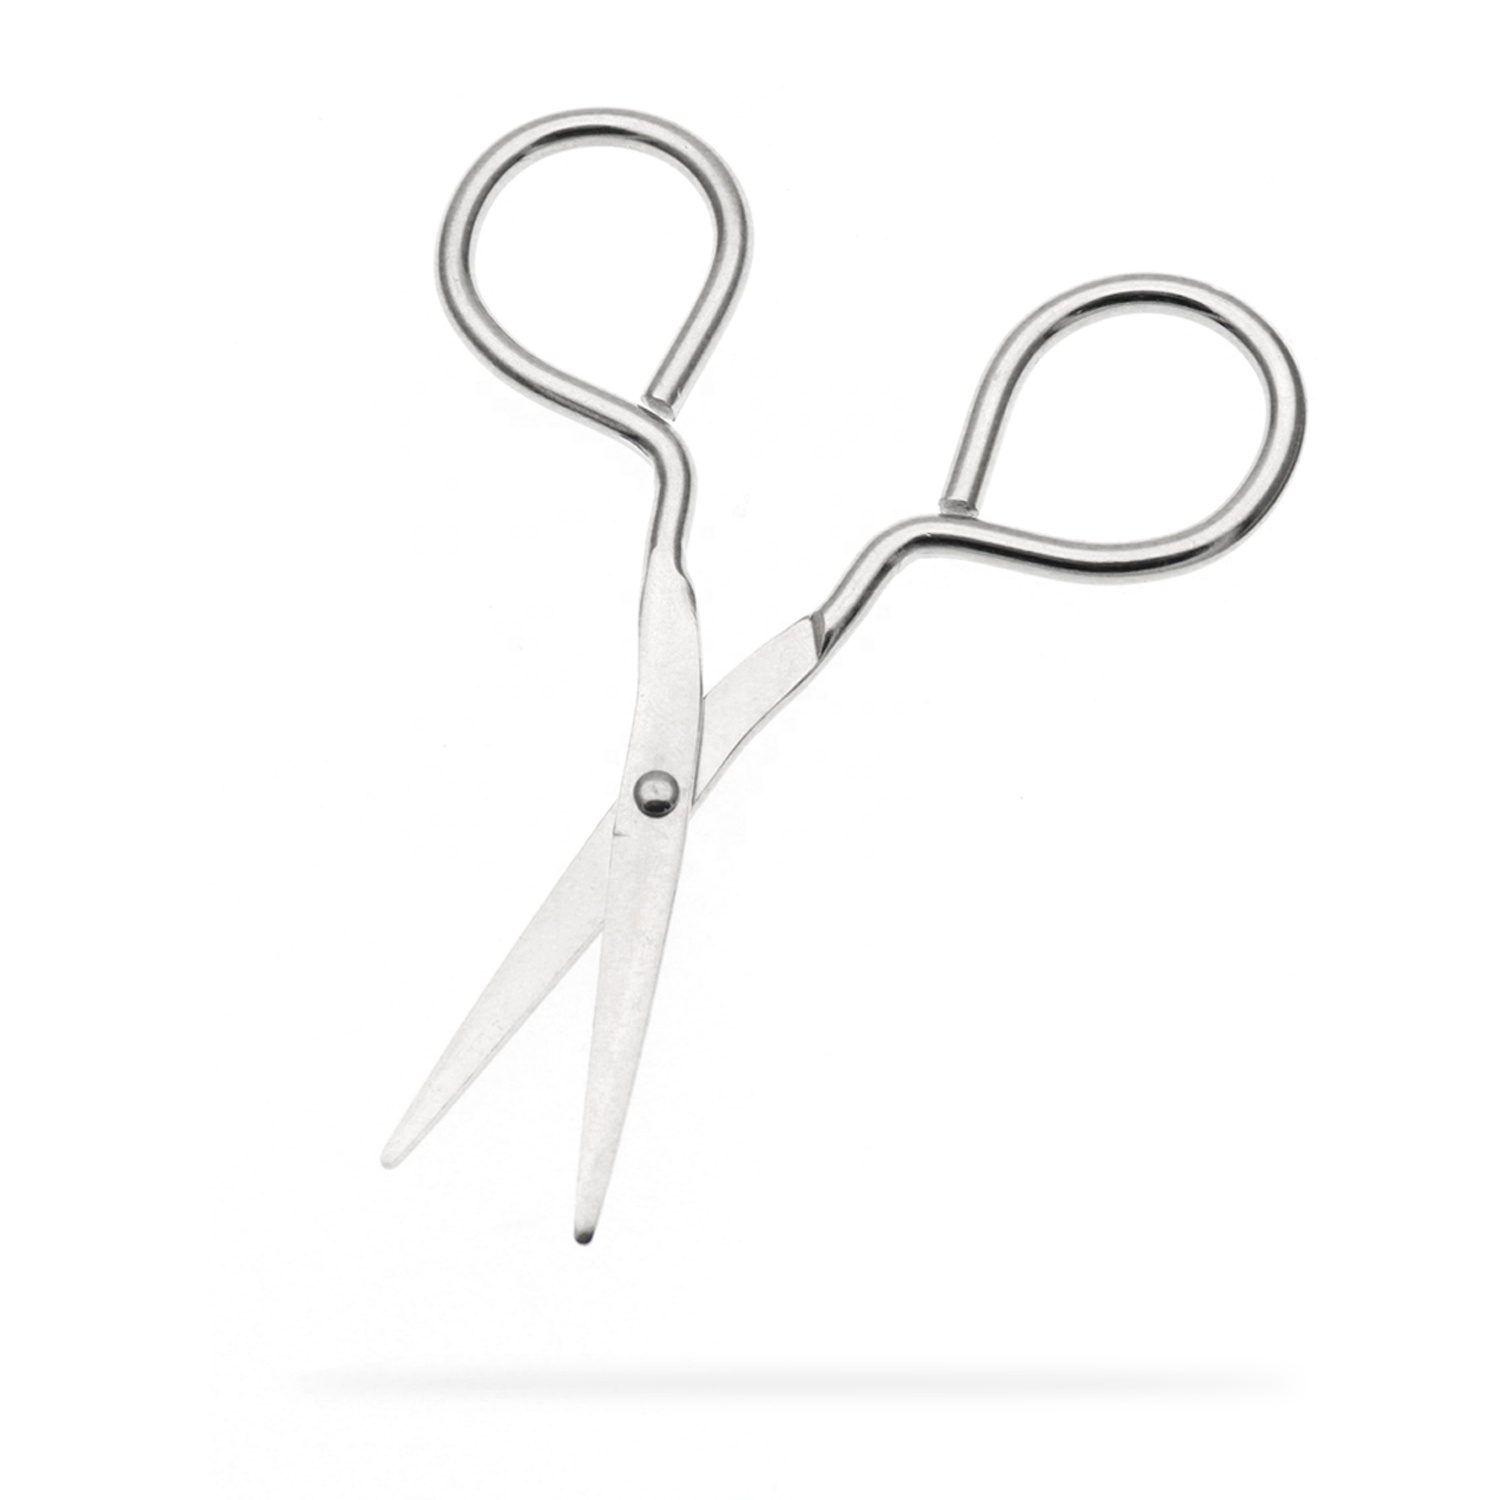 27049984O Mini Stitch Scissors, Stainless Wire Steel Scissors Shears Point-End Surface Small Bandage Firstaid for Embroidery
